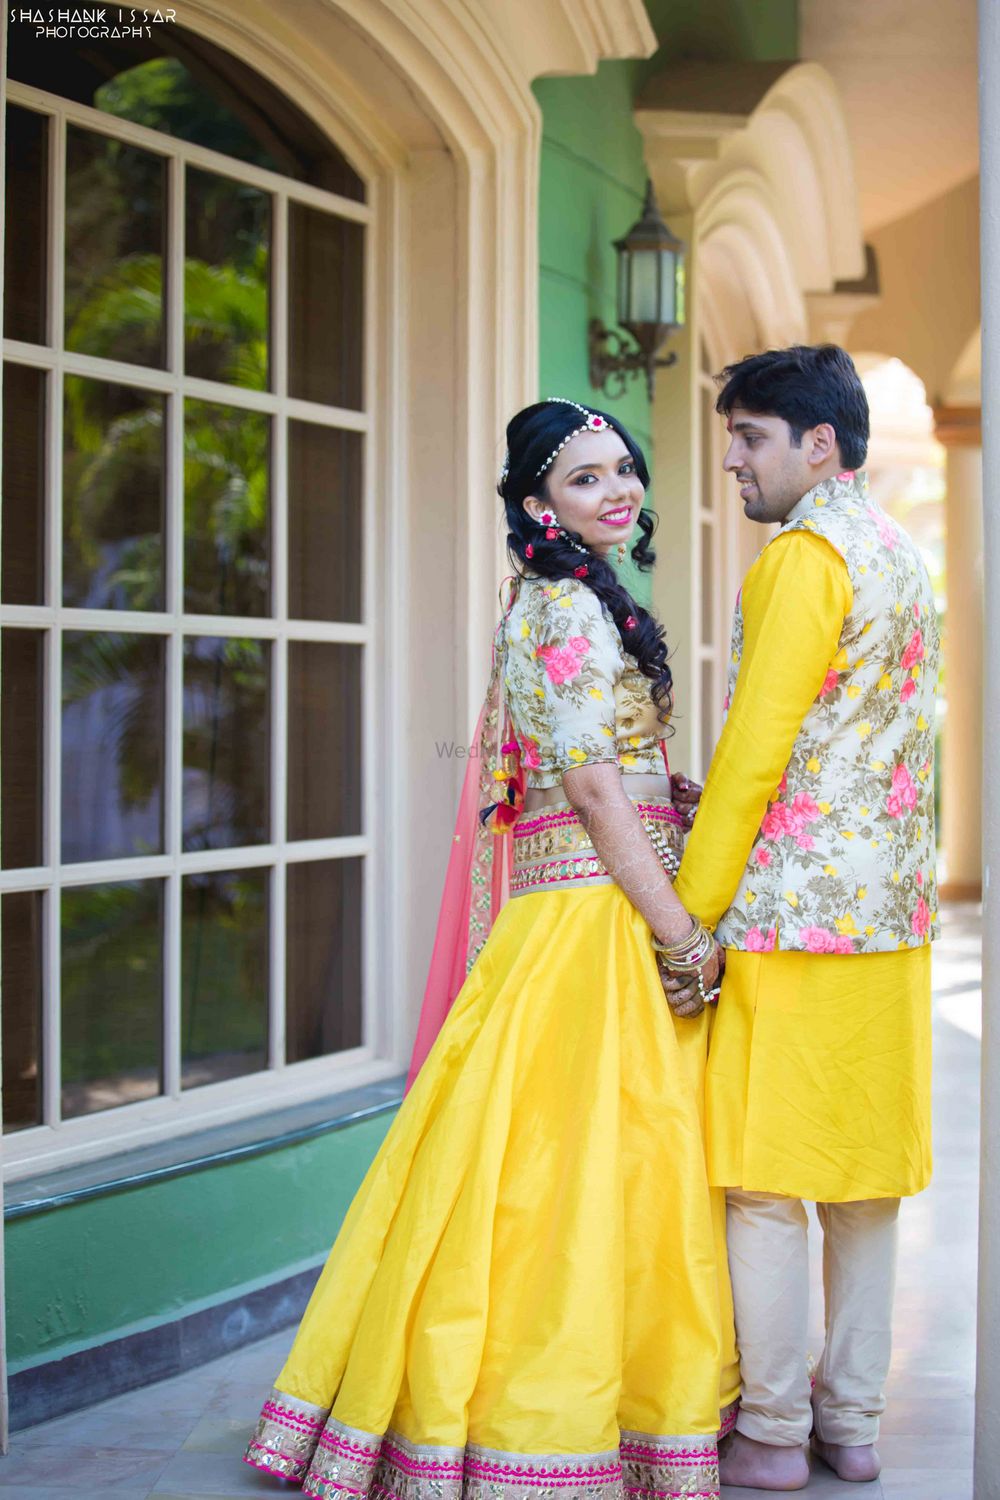 Photo of Bride and groom in coordinated yellow and floral outfit